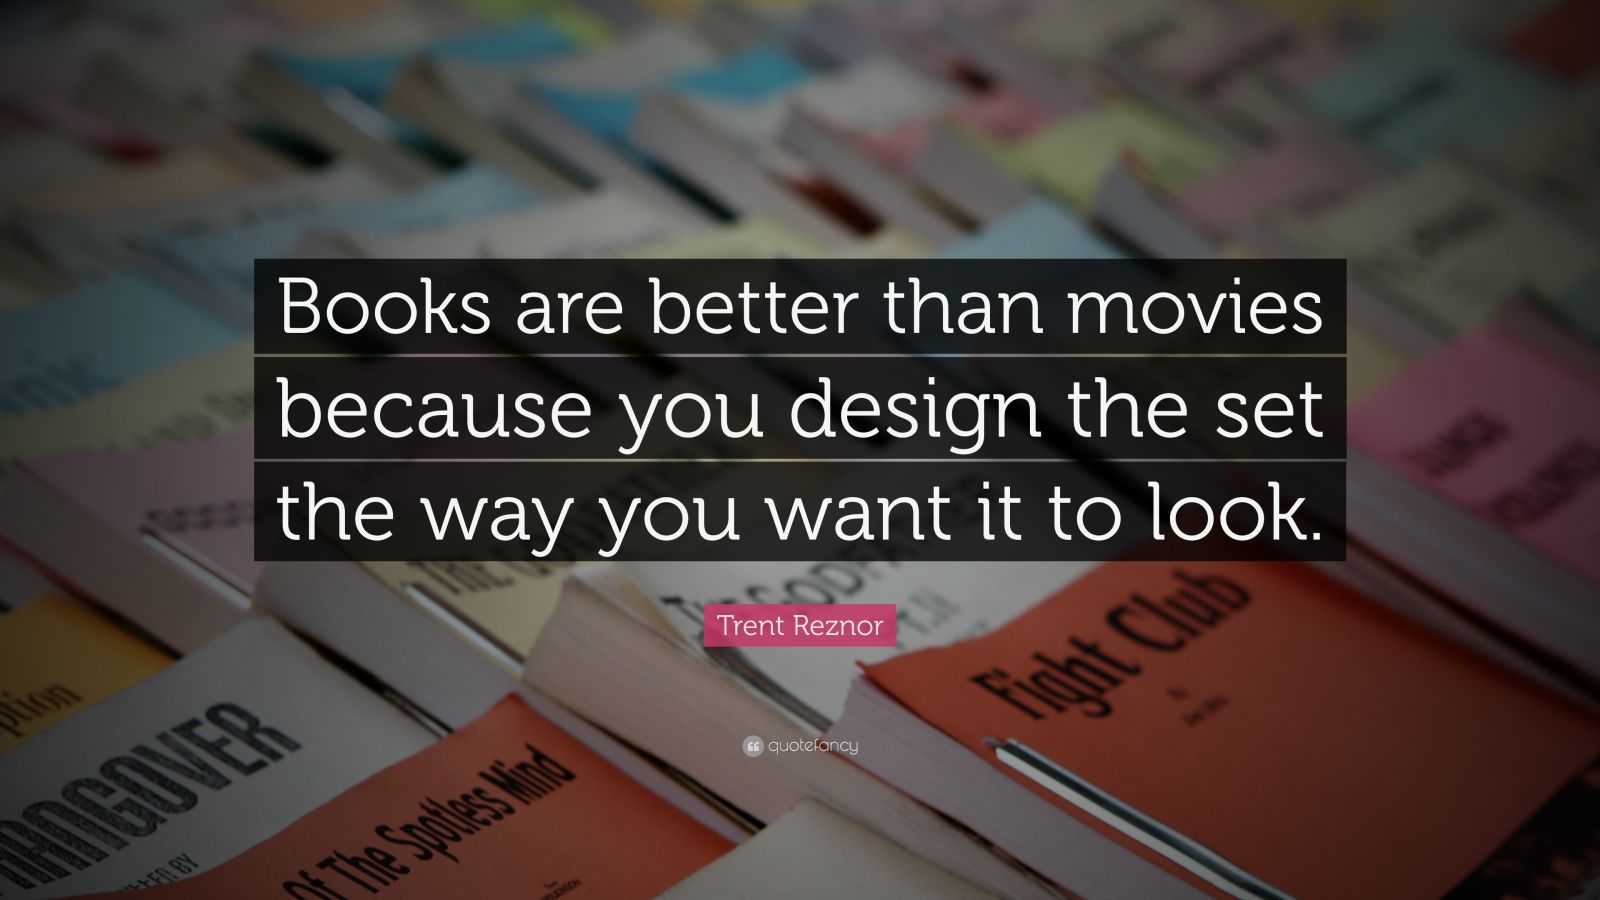 Trent Reznor Quote: “Books are better than movies because you design the  set the way you